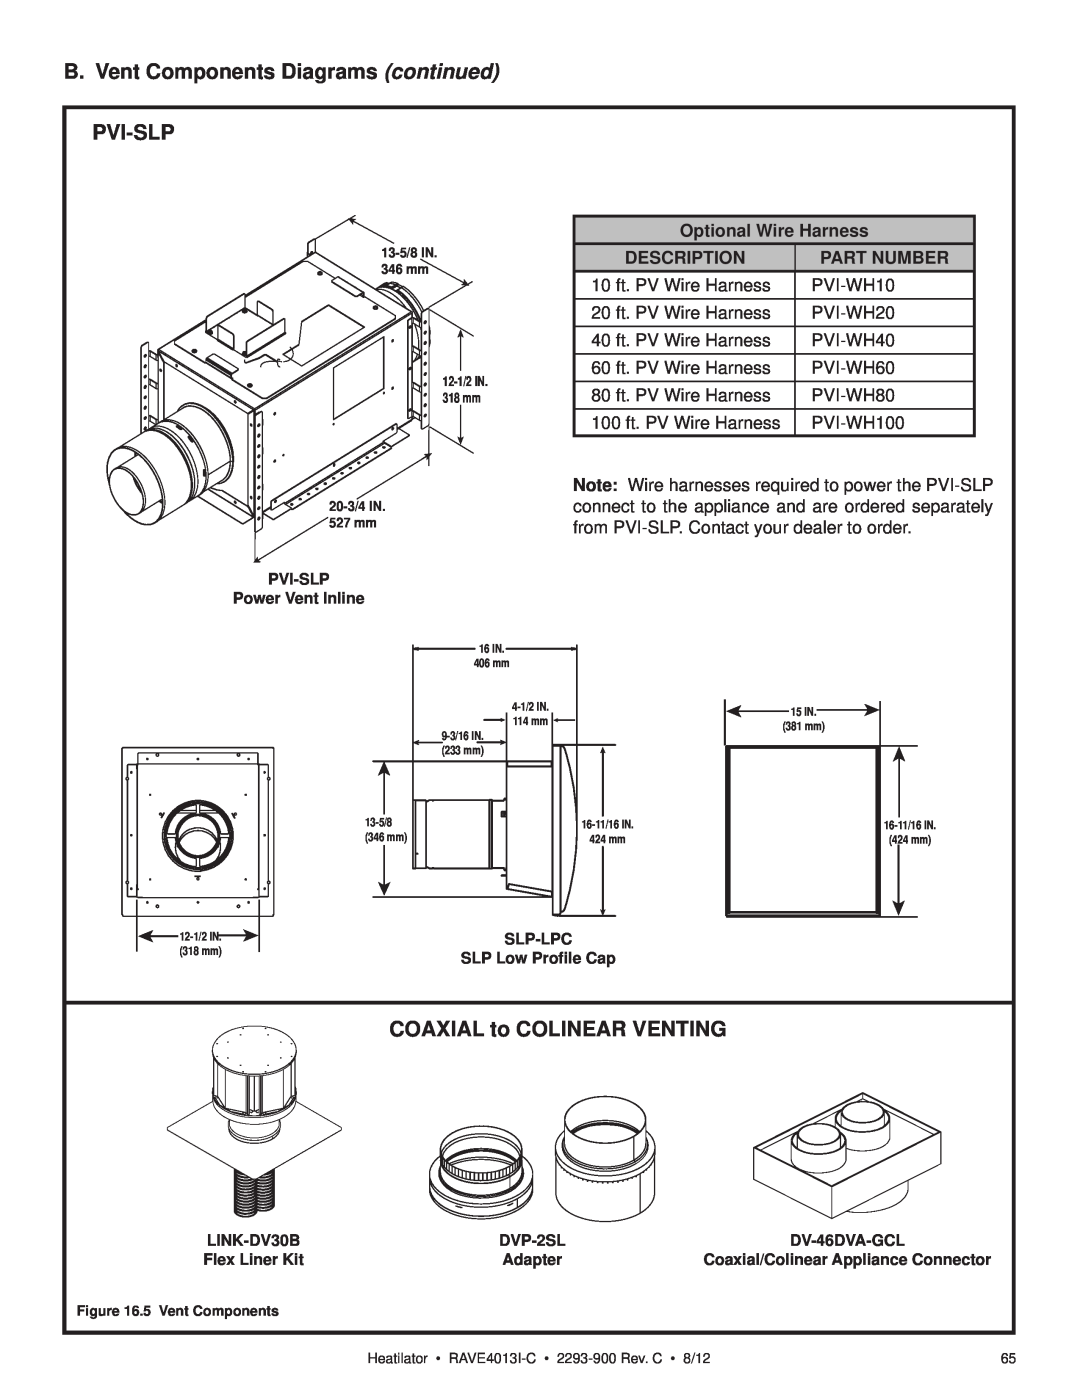 Heatiator Rave4013i-c B. Vent Components Diagrams continued PVI-SLP, COAXIAL to COLINEAR VENTING, Optional Wire Harness 